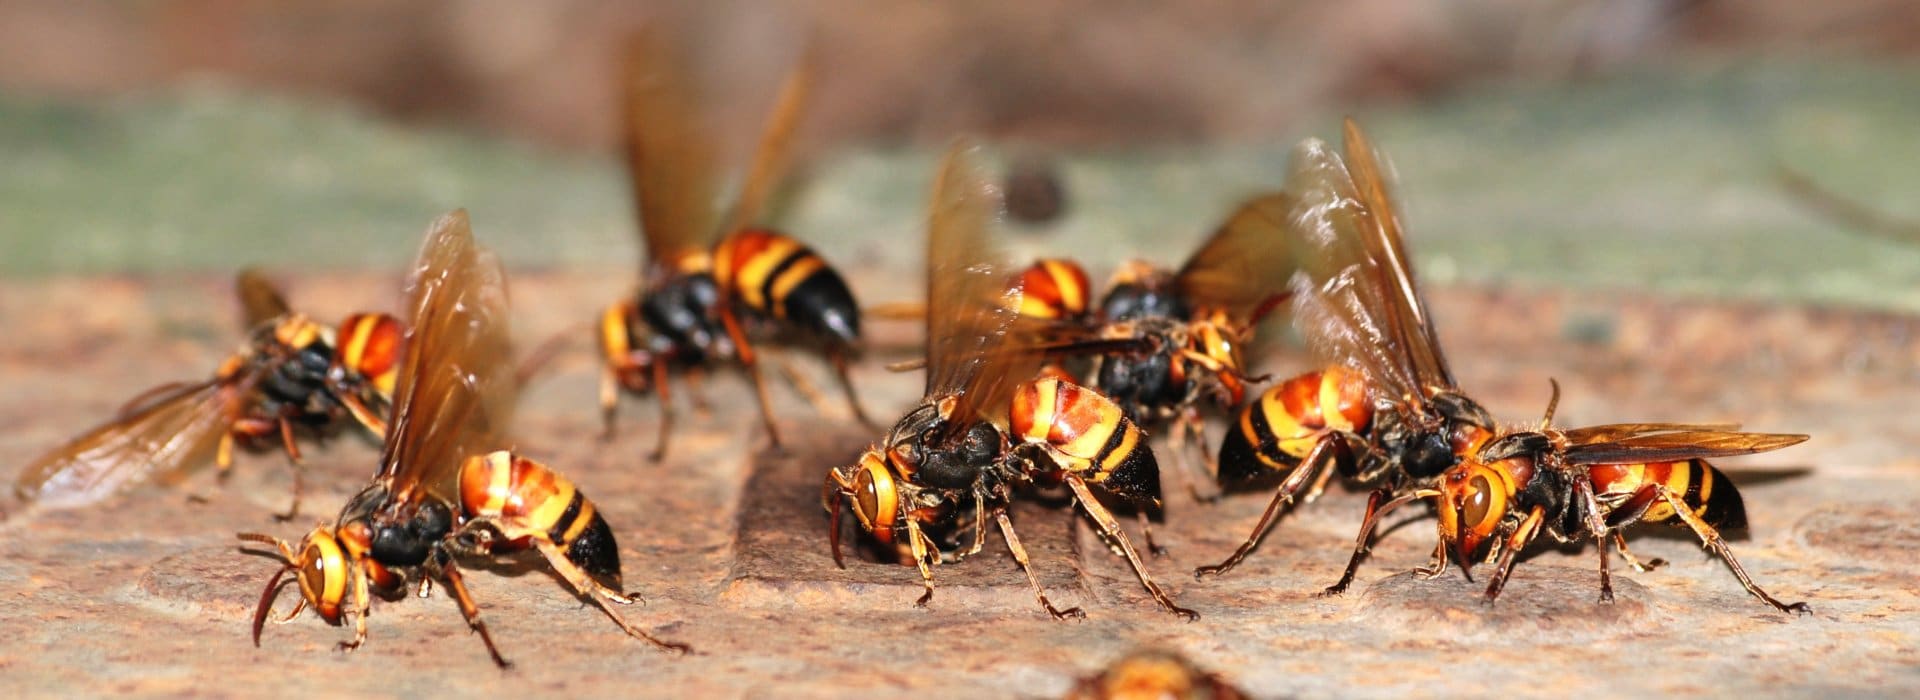 How To Get Rid Of Hornets And Wasps Environmental Pest Management